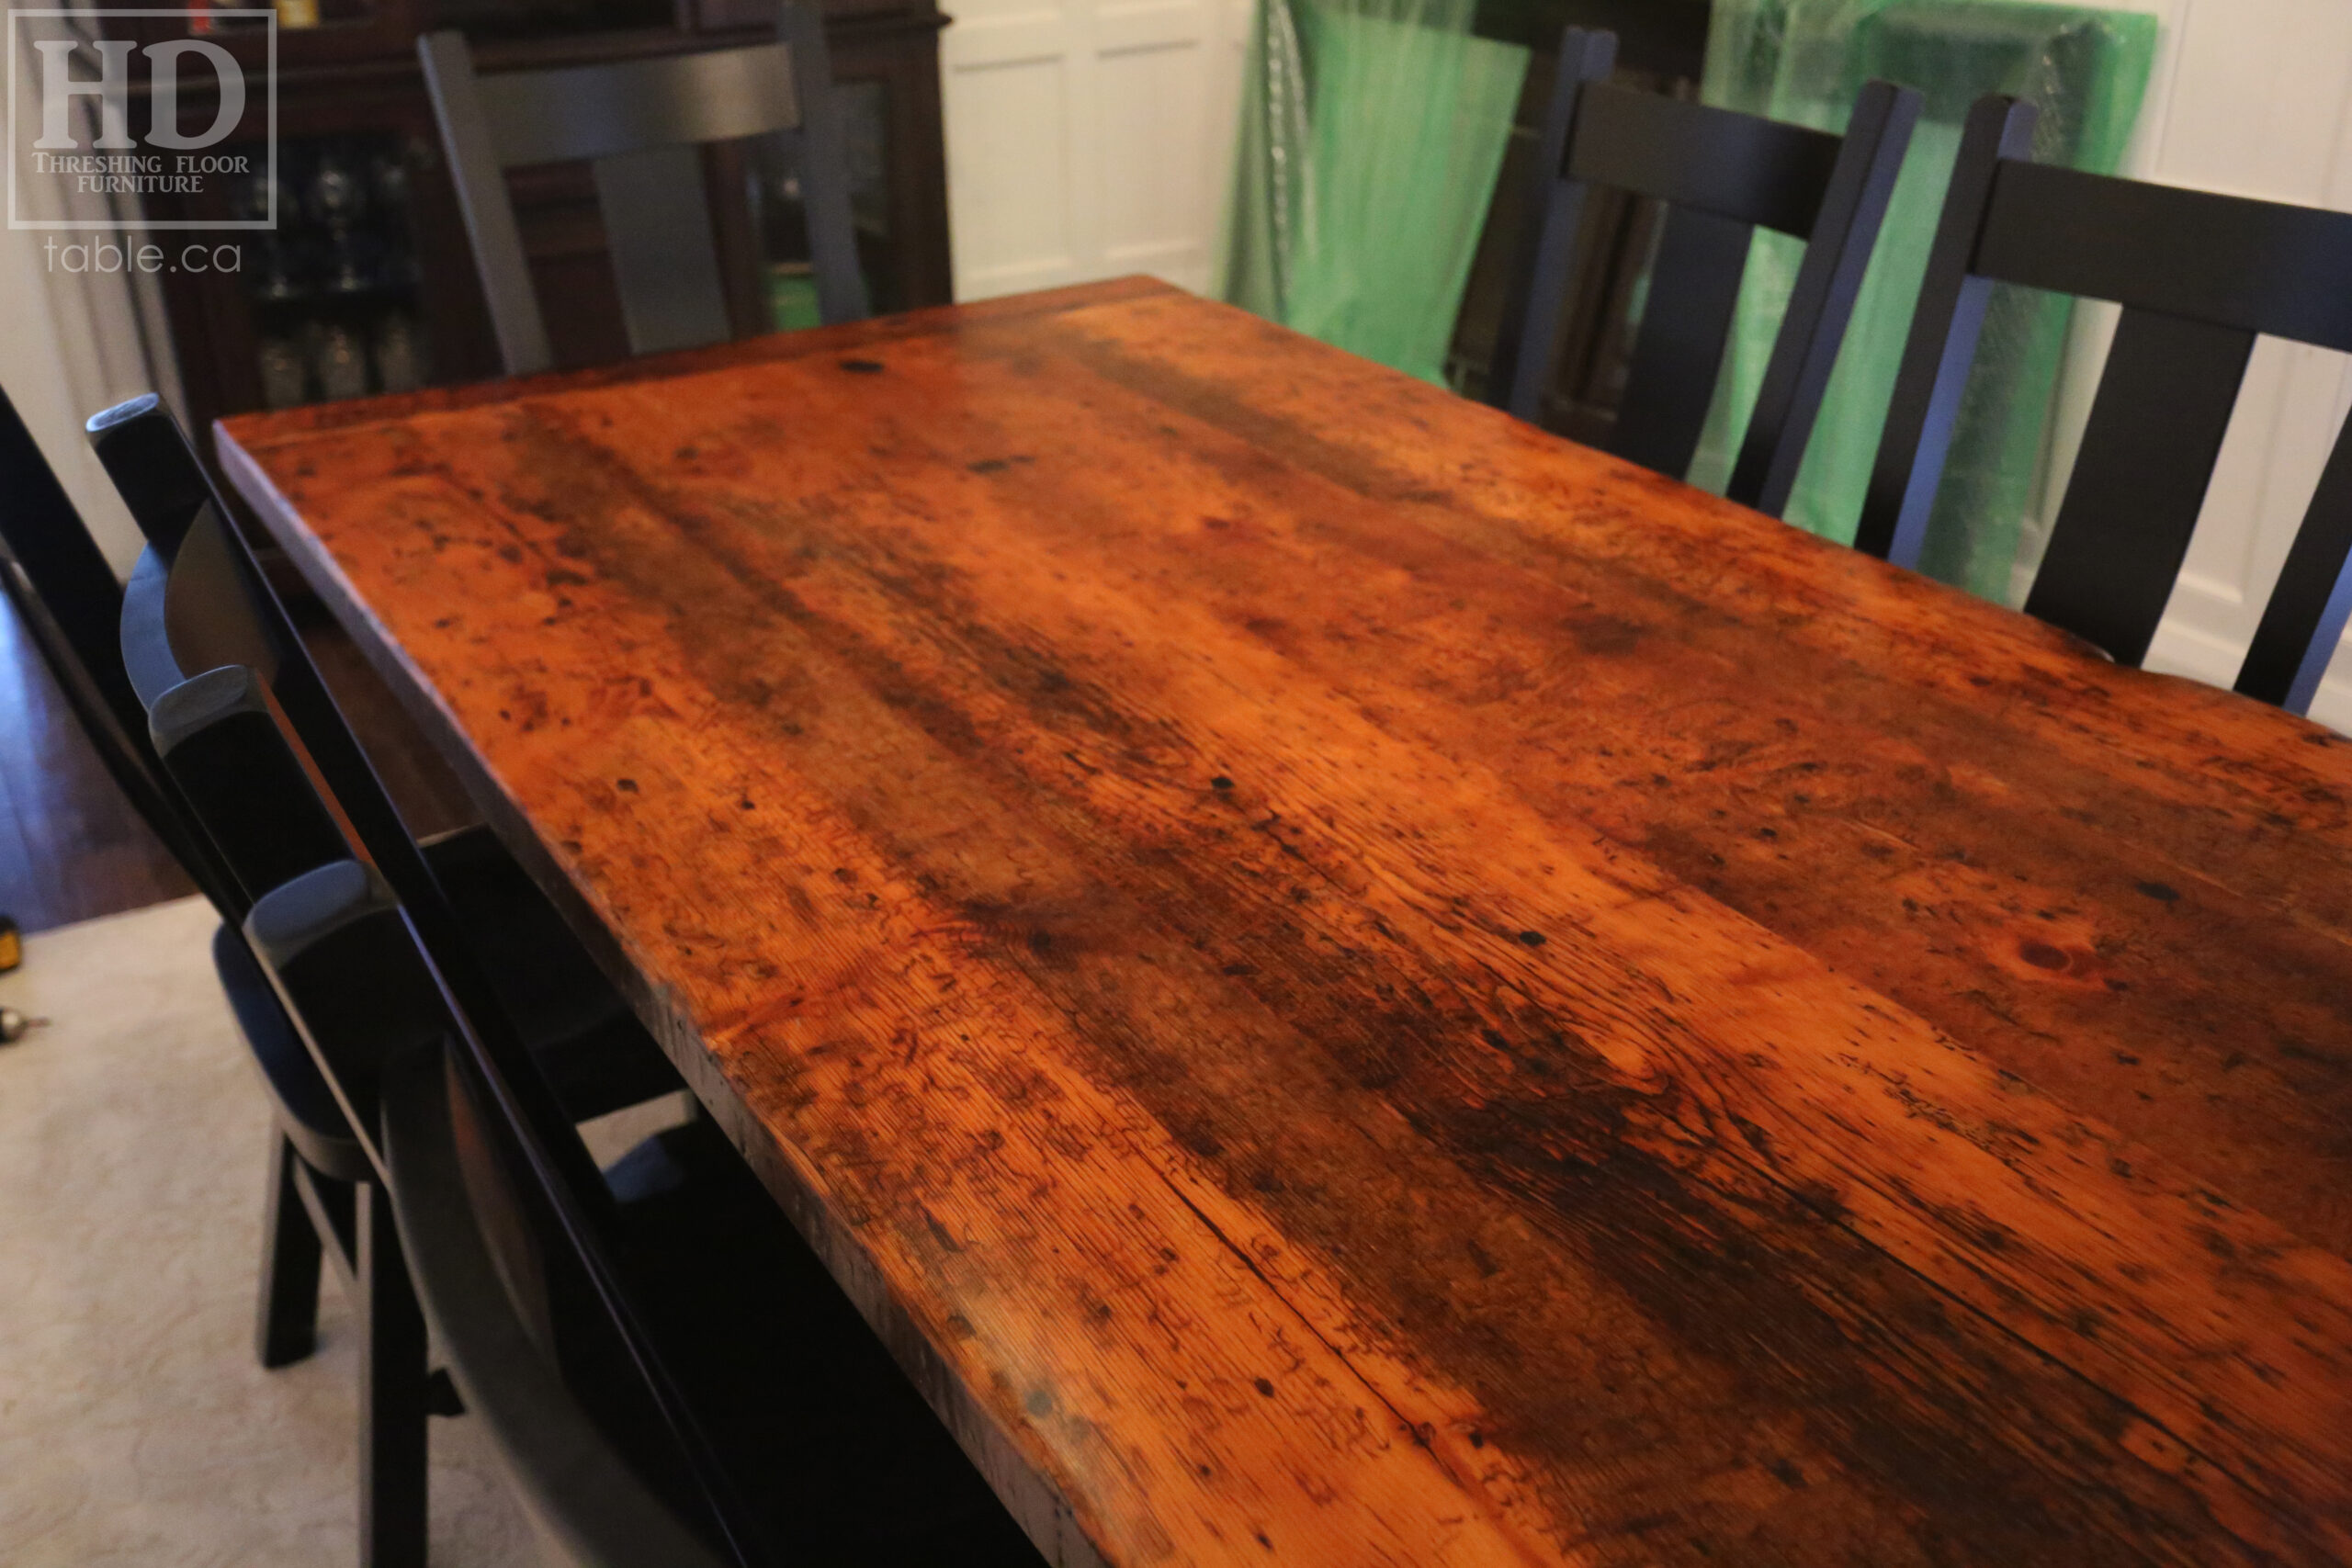 12' Reclaimed Wood Table for a Port Dover home - 42" wide - Trestle Base - 2" Old Growth Pine Threshing Floor Construction - Original edges & distressing maintained - Premium epoxy + satin polyurethane finish - Black Painted Base - 12 Plank Back Chairs / Wormy Maple - Painted Solid Black / Satin polyurethane clearcoat finish - www.table.ca